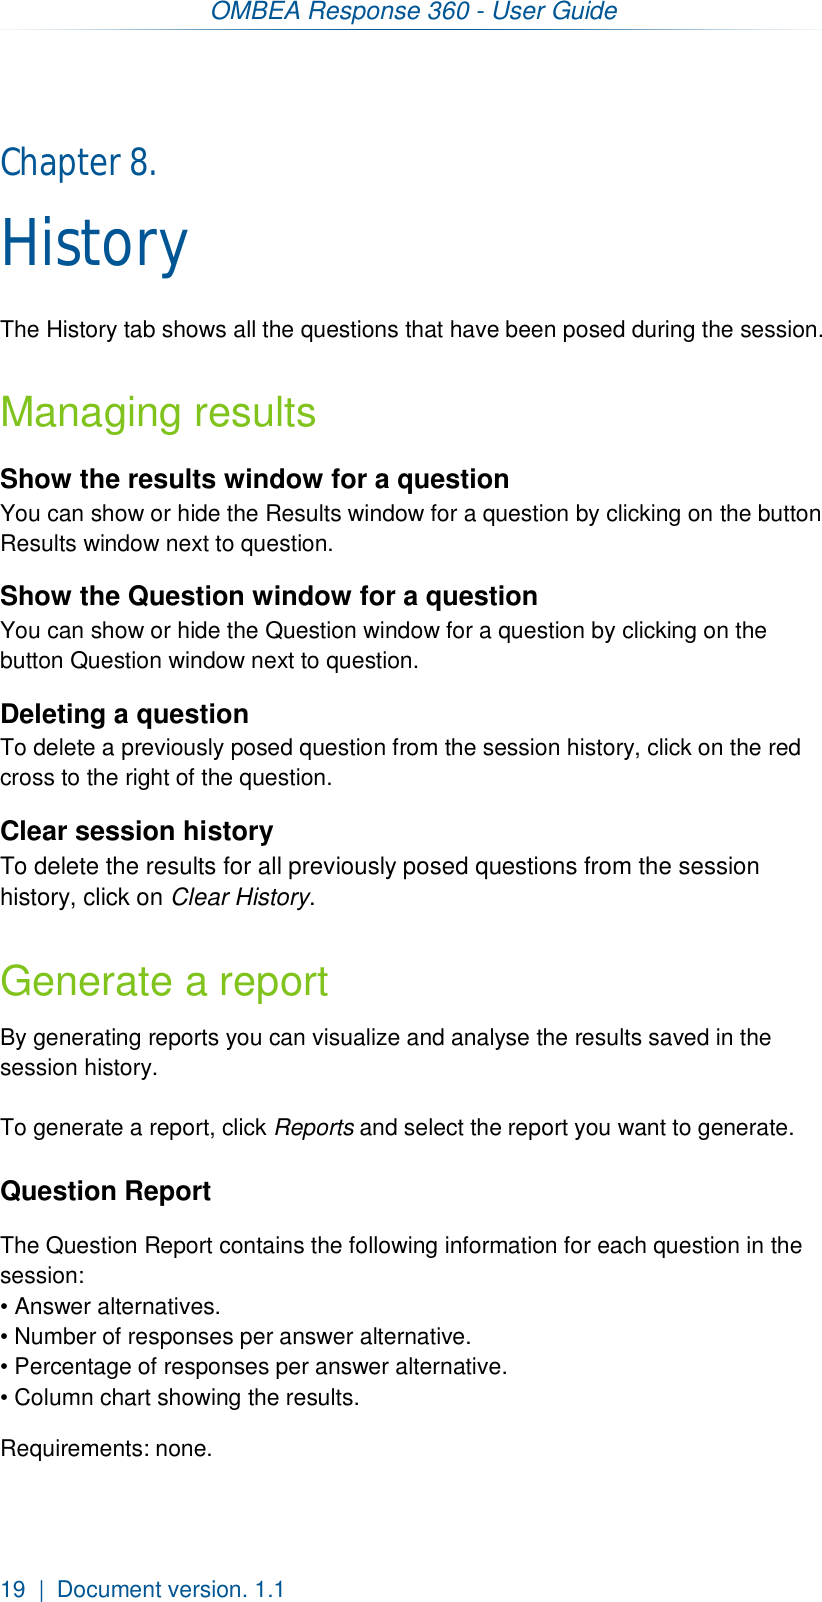 OMBEA Response 360 - User Guide  19  |  Document version. 1.1 Chapter 8.  History The History tab shows all the questions that have been posed during the session. Managing results Show the results window for a question You can show or hide the Results window for a question by clicking on the button Results window next to question. Show the Question window for a question You can show or hide the Question window for a question by clicking on the button Question window next to question. Deleting a question To delete a previously posed question from the session history, click on the red cross to the right of the question.   Clear session history To delete the results for all previously posed questions from the session history, click on Clear History. Generate a report By generating reports you can visualize and analyse the results saved in the session history.  To generate a report, click Reports and select the report you want to generate.  Question Report The Question Report contains the following information for each question in the session: • Answer alternatives. • Number of responses per answer alternative. • Percentage of responses per answer alternative. • Column chart showing the results.  Requirements: none.   